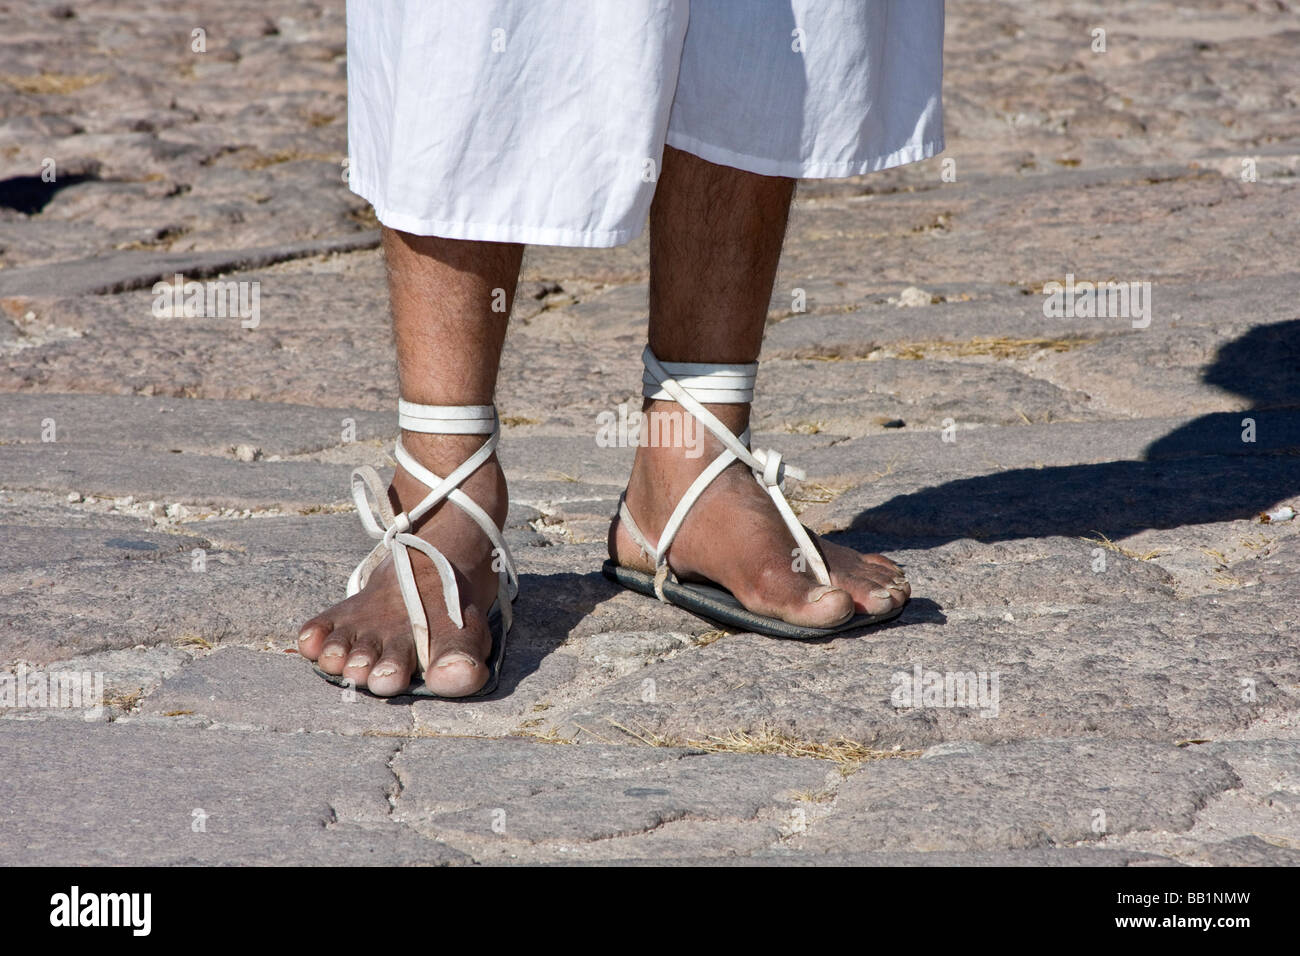 Native man wearing hurache sandal made of leather thongs with car tires ...